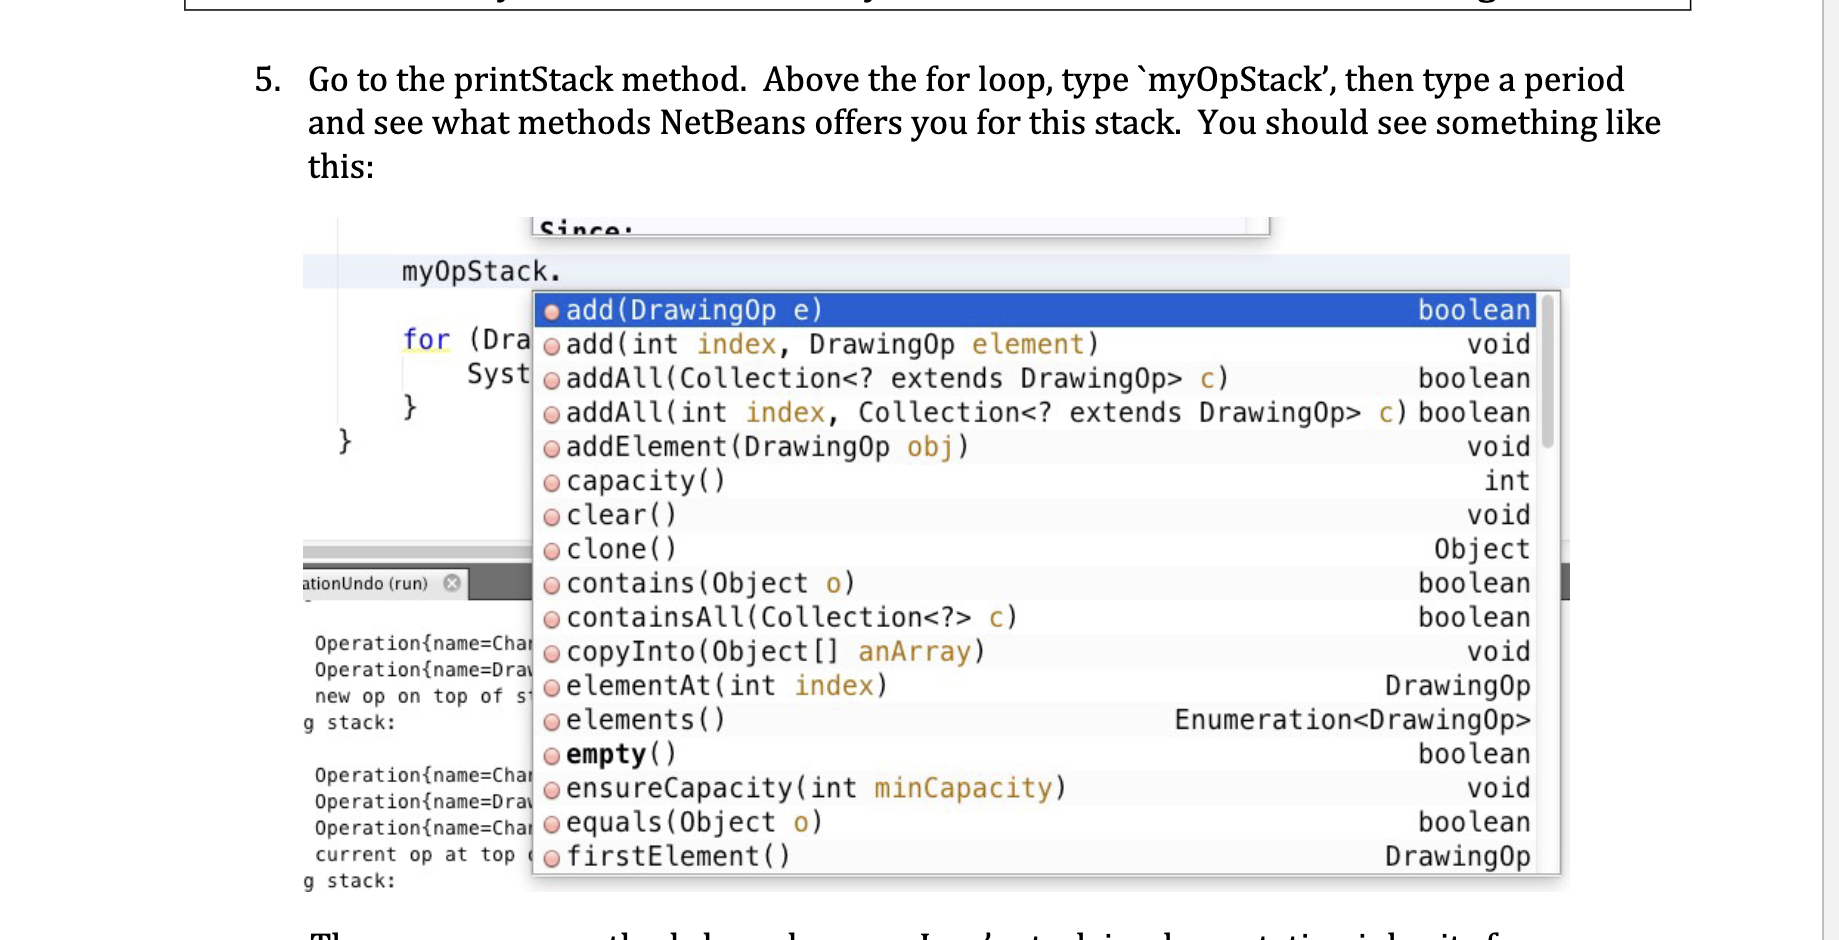 5. Go to the printStack method. Above the for loop, type `myOpStack', then type a period and see what methods